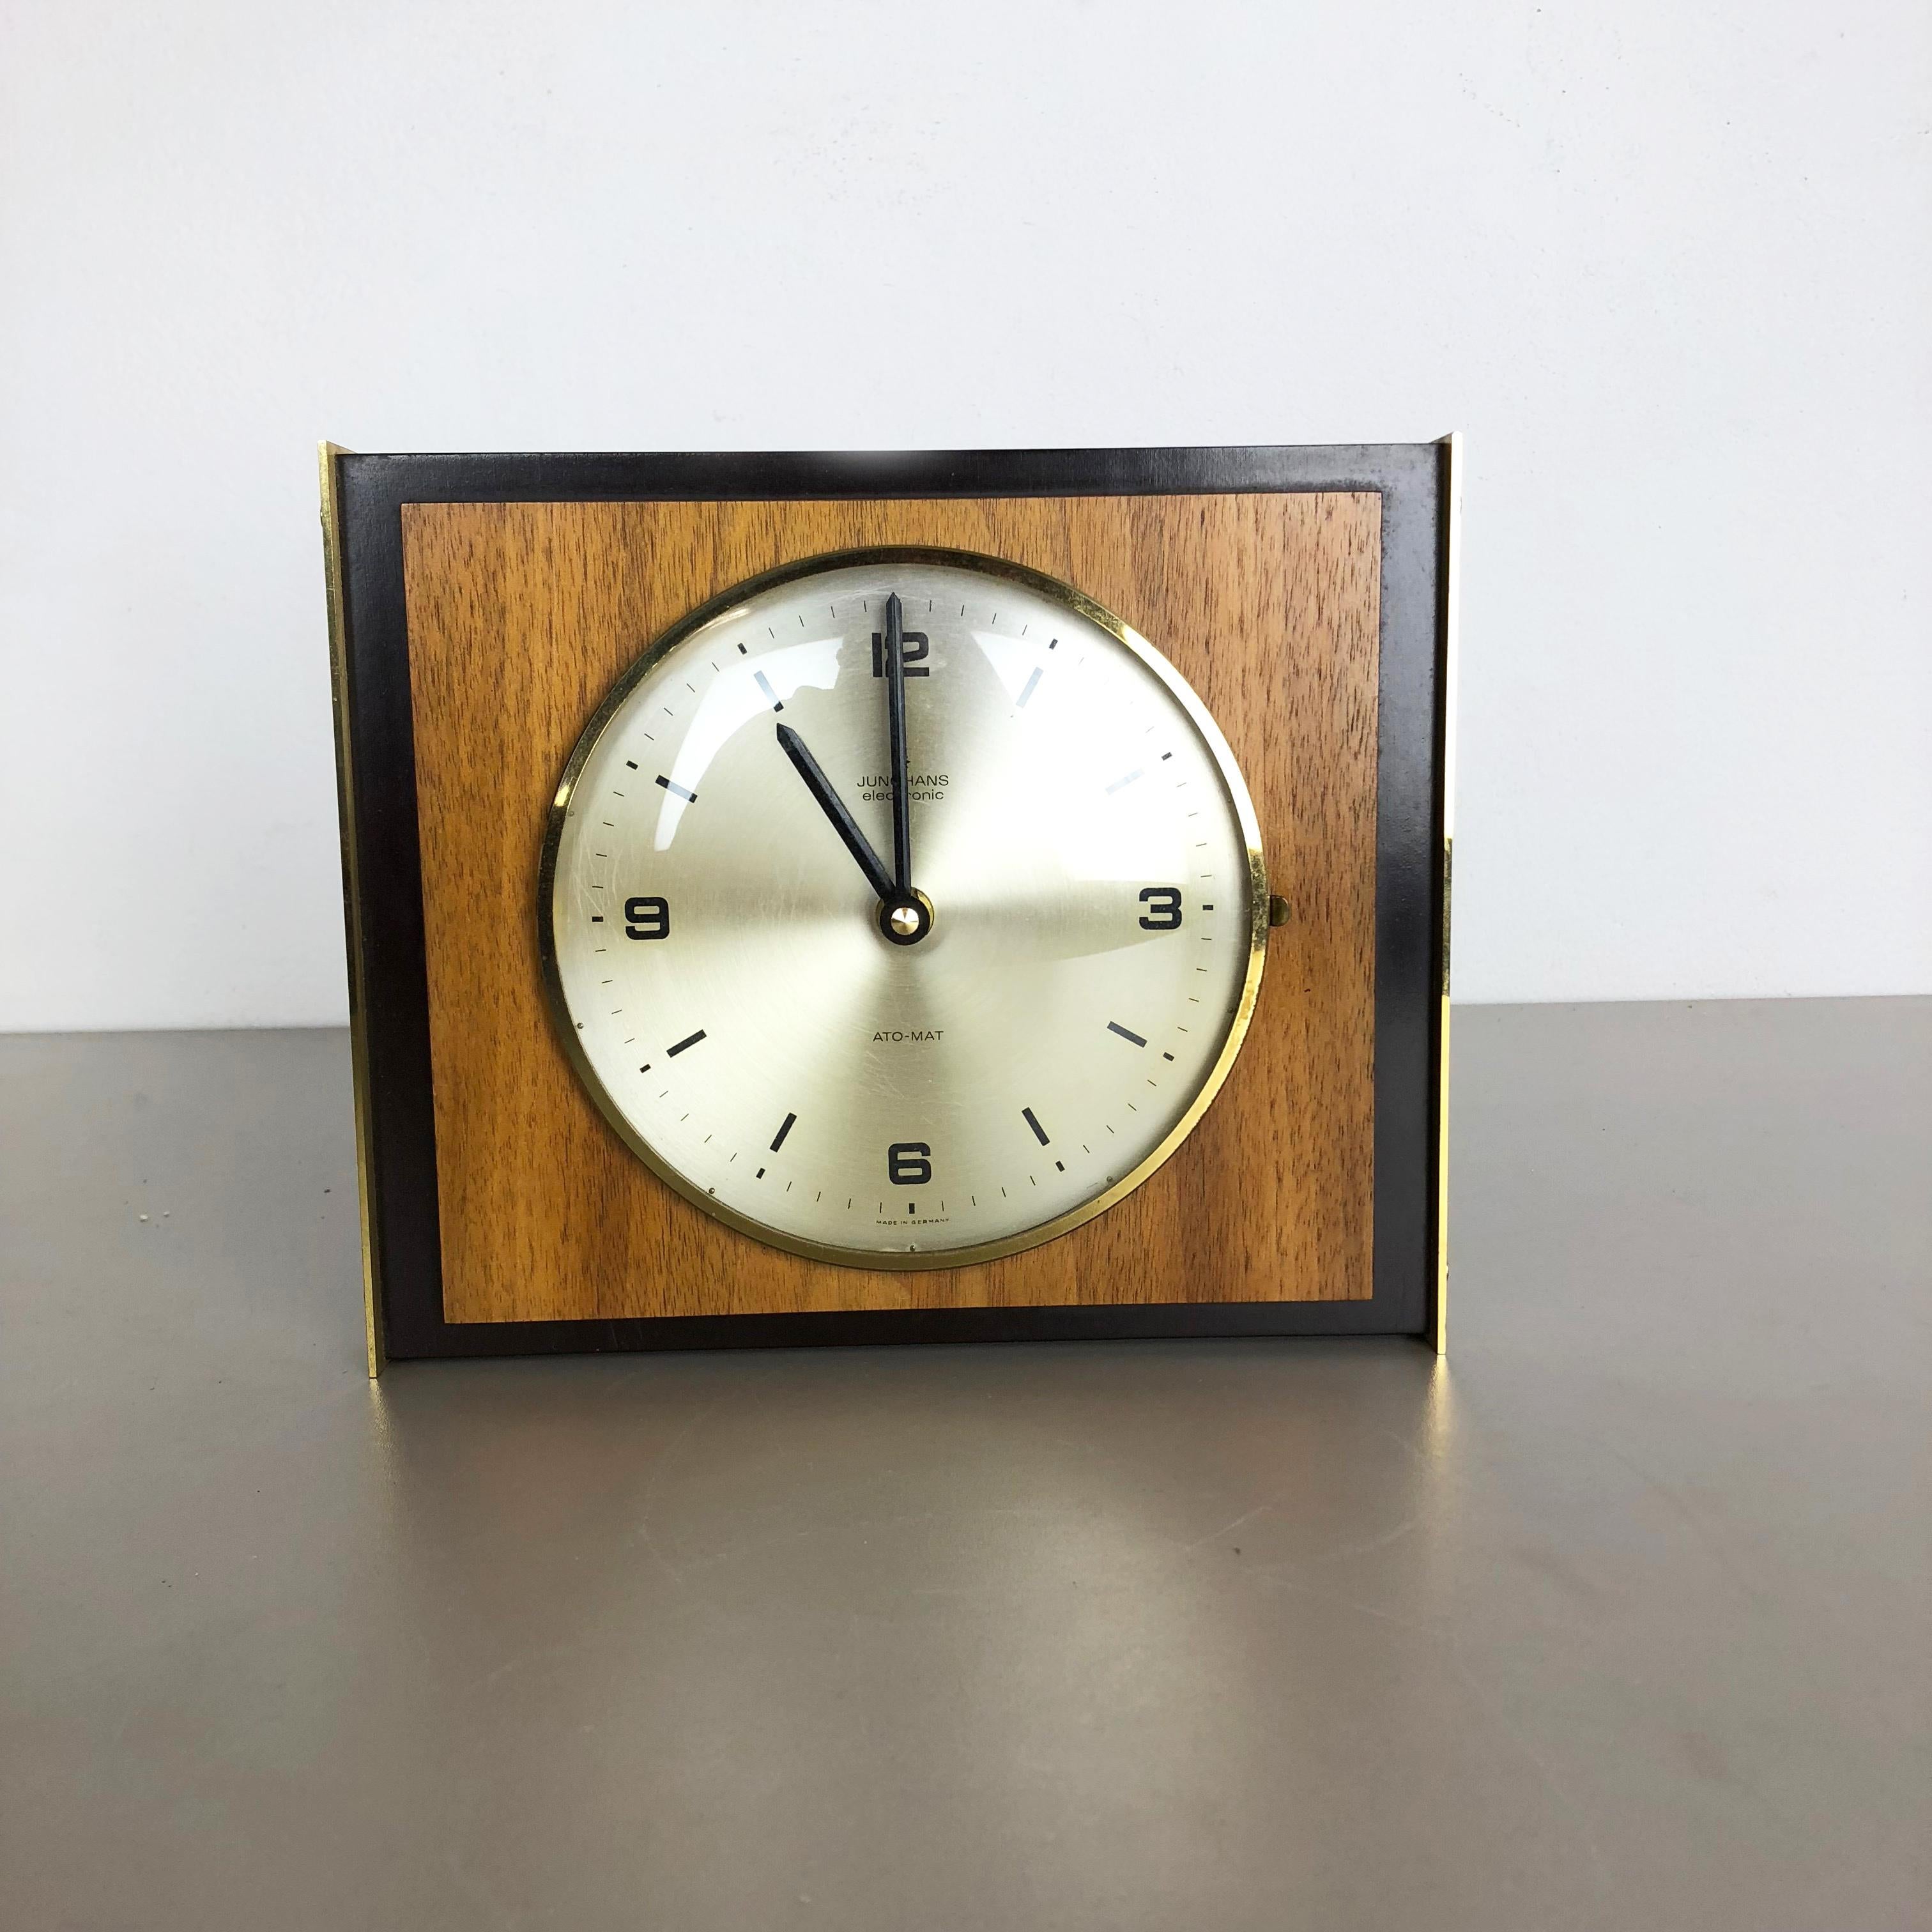 Article:

Table clock, wall clock



Origin:

Germany


Producer:

Junghans Electronic, Germany


Age:

1960s





This original vintage table clock was produced in the 1960s by the premium clock producer Junghans in Germany.